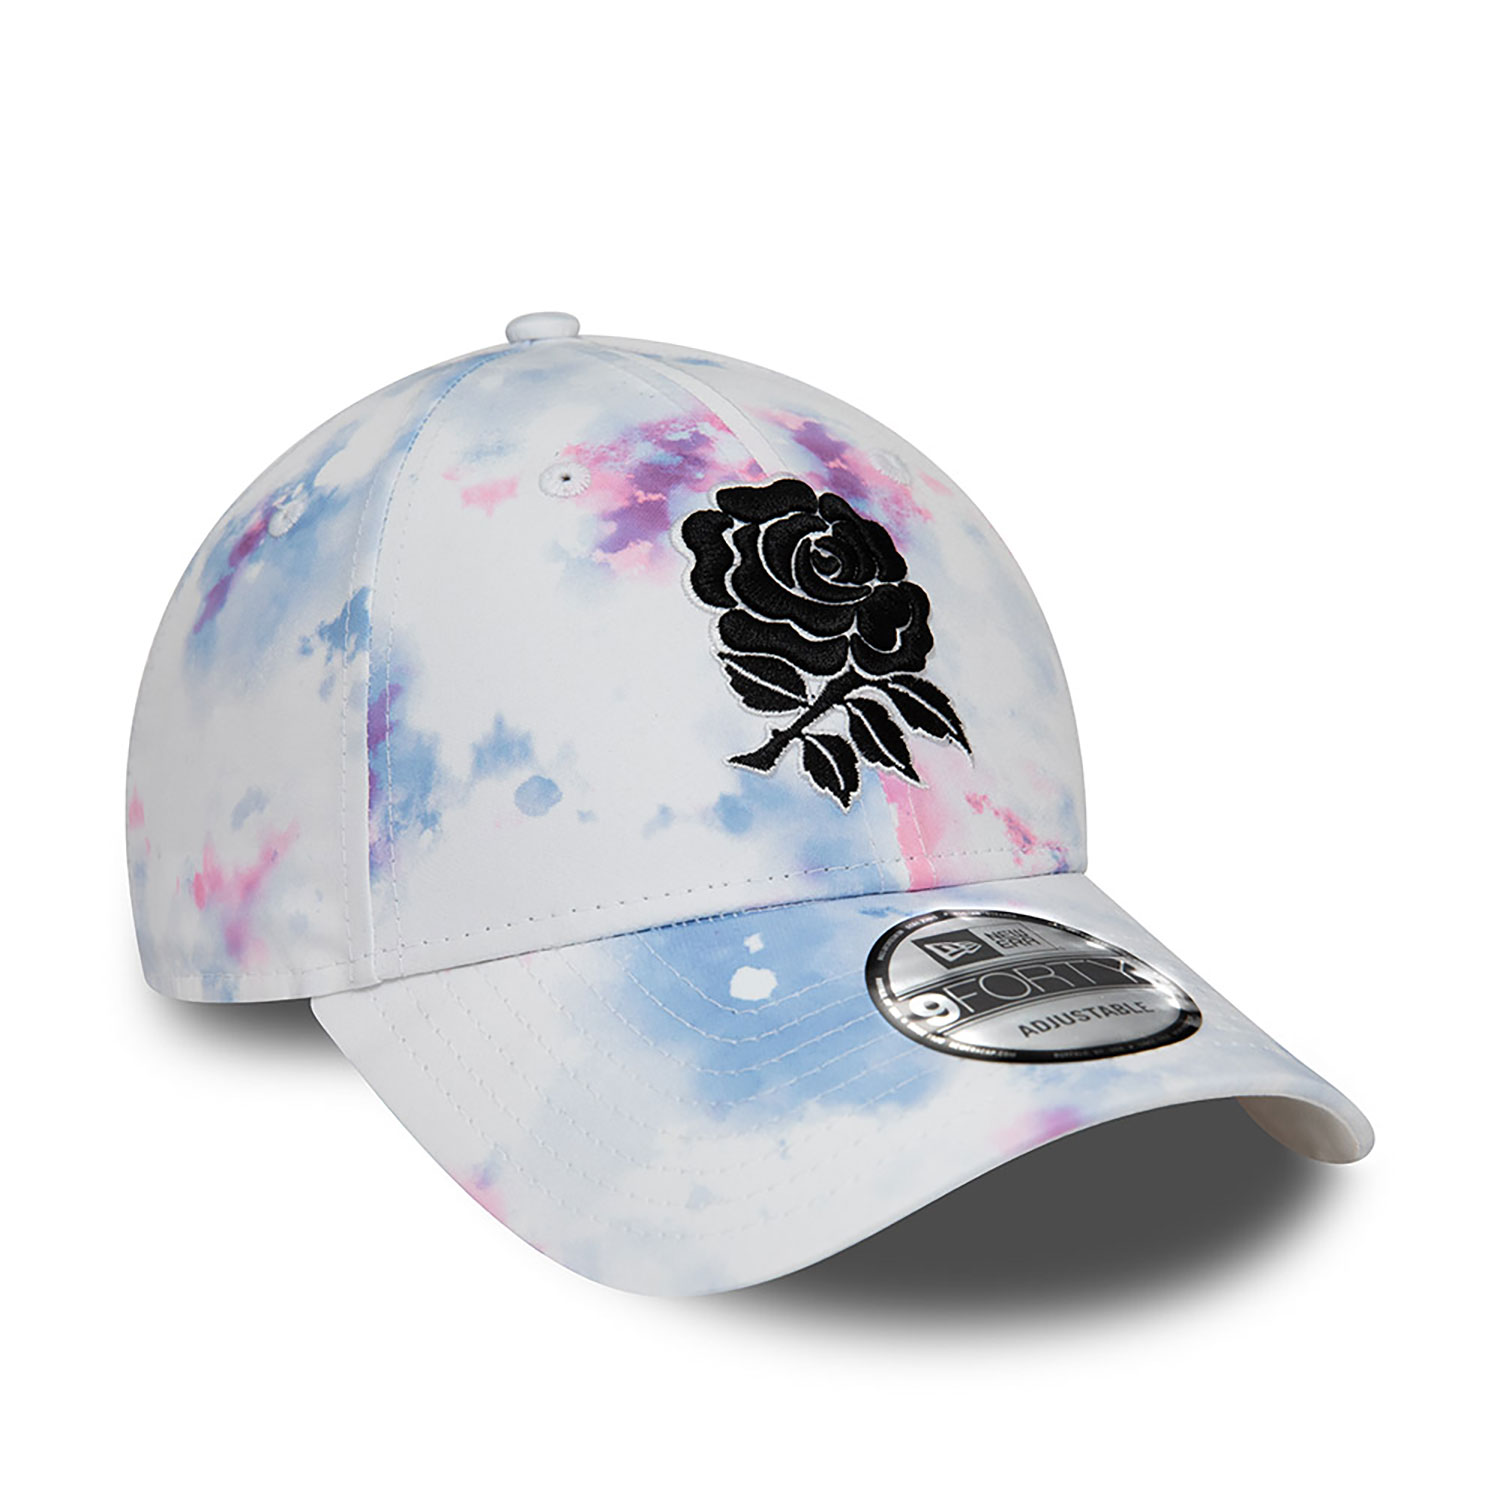 Rugby Football Union All Over Print Tiedye White 9FORTY Adjustable Cap